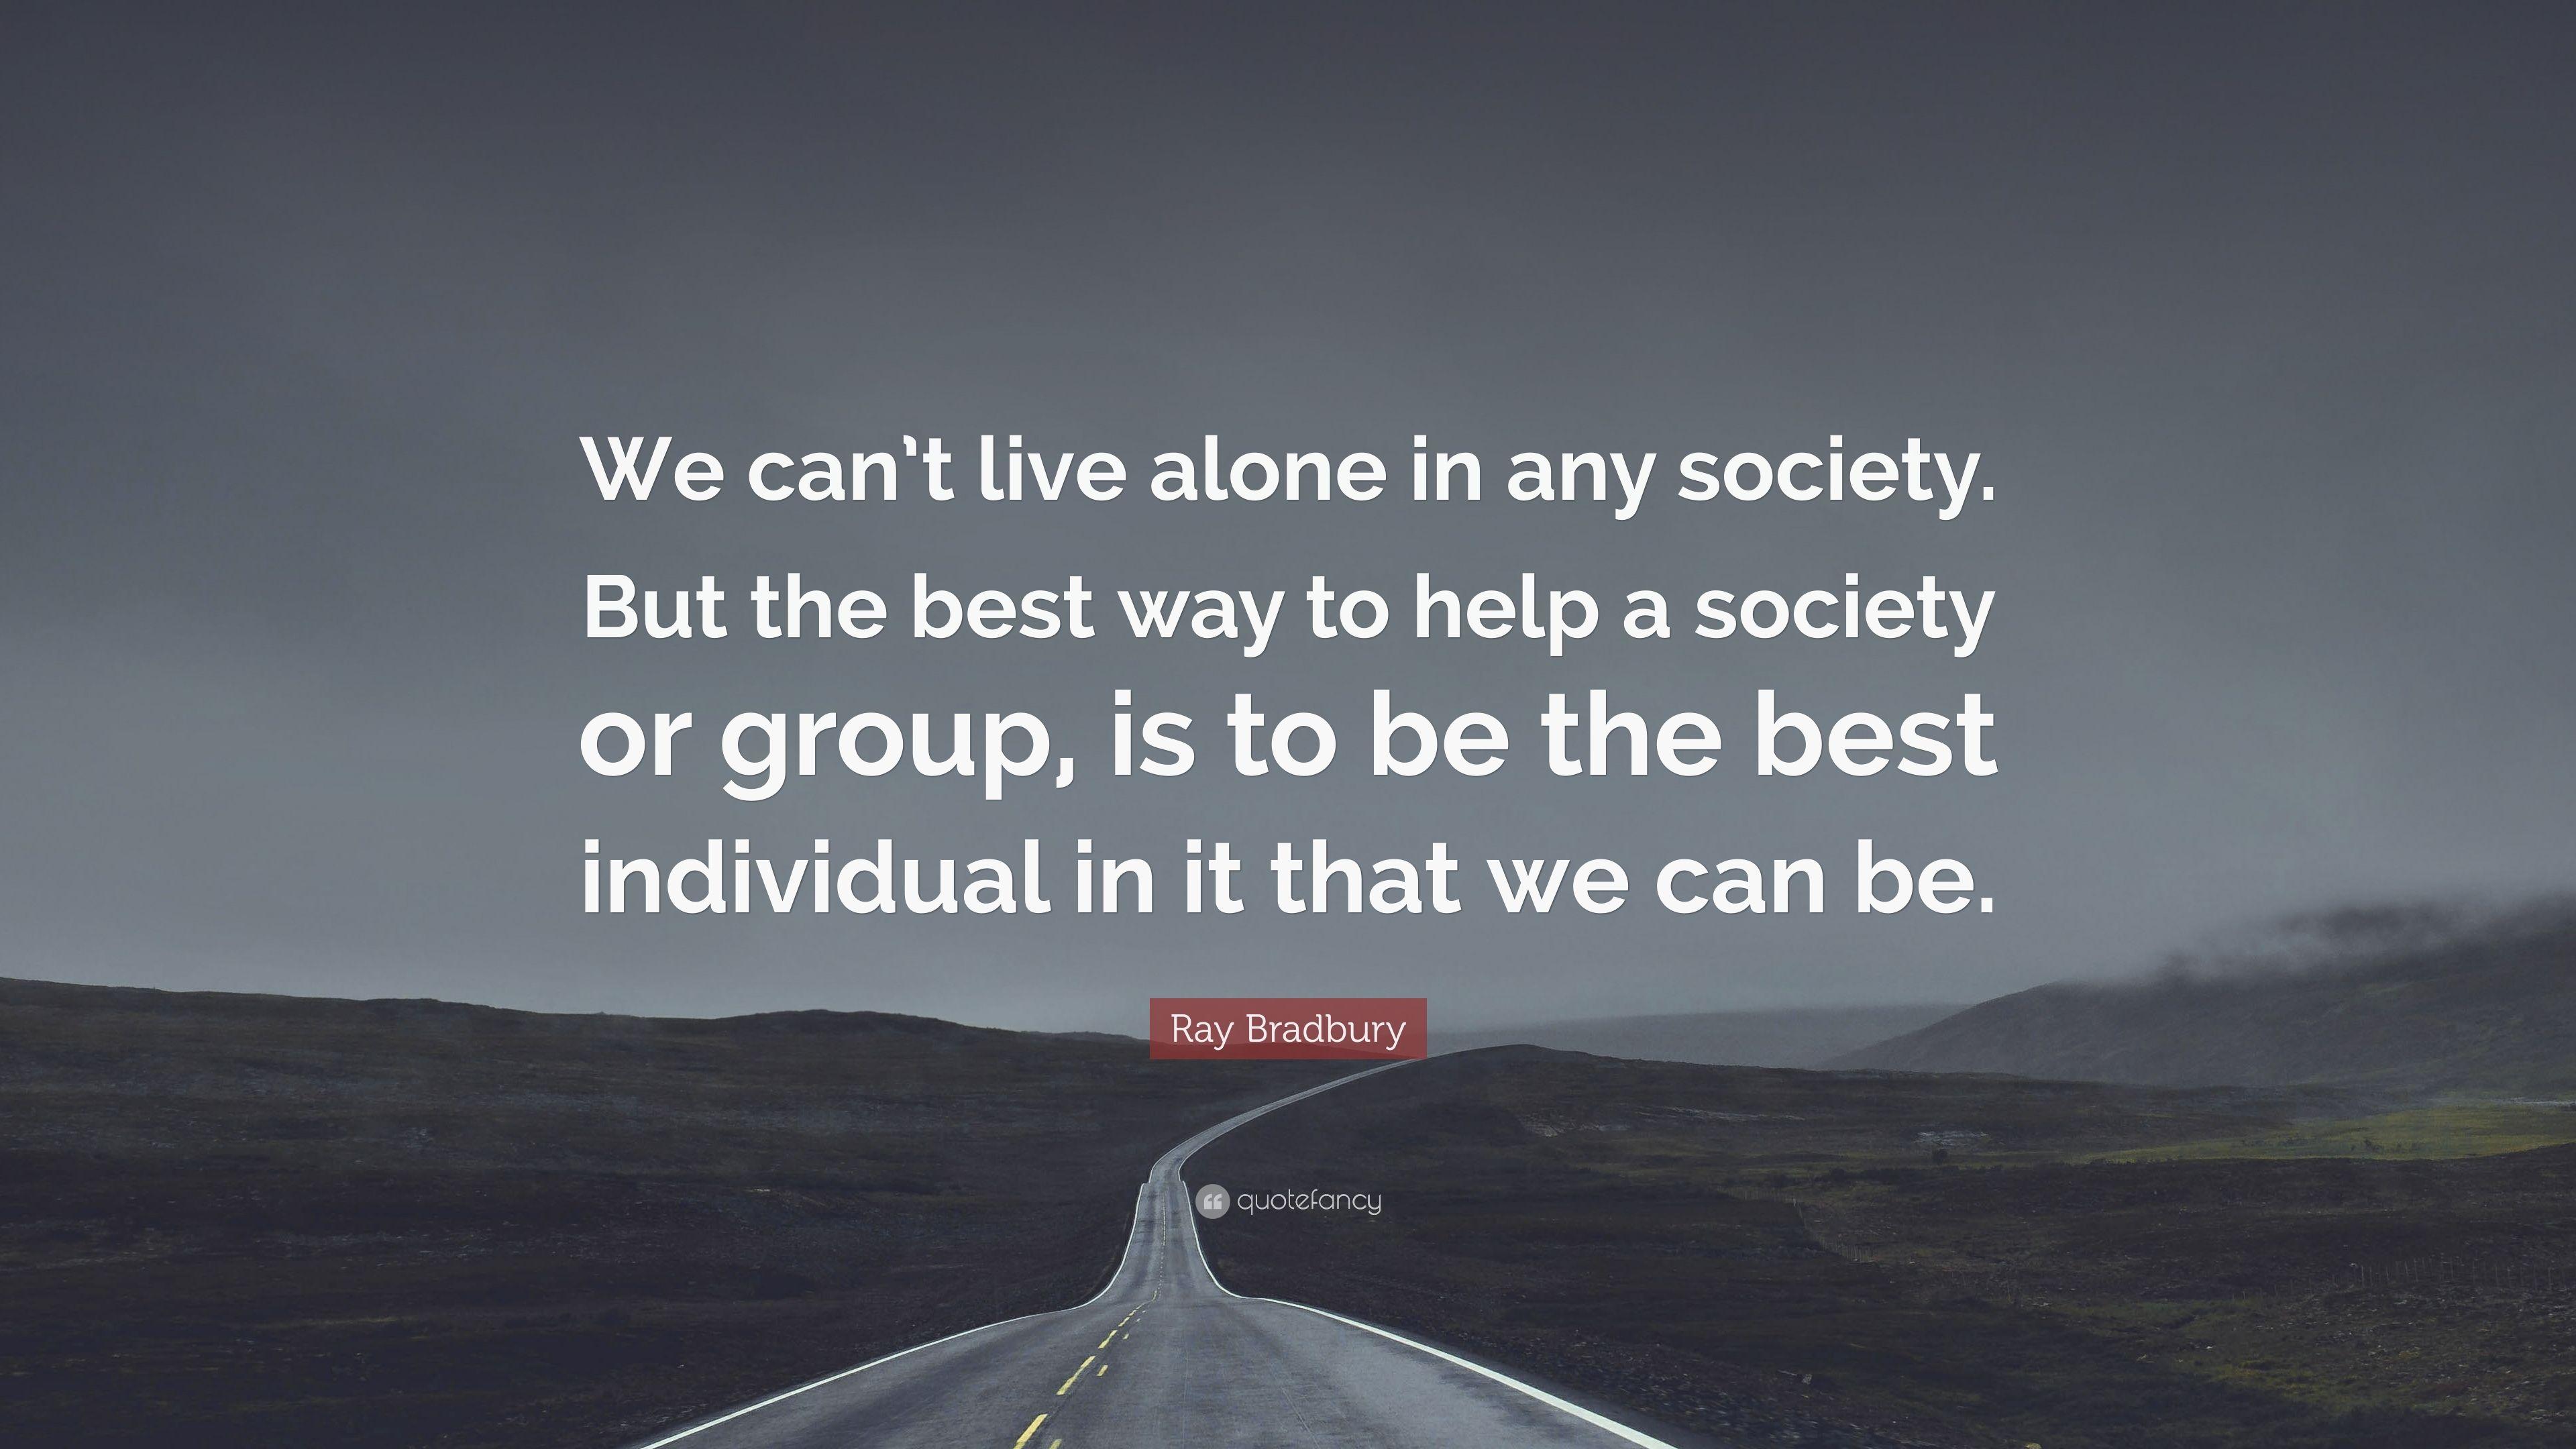 Ray Bradbury Quote: “We can't live alone in any society. But